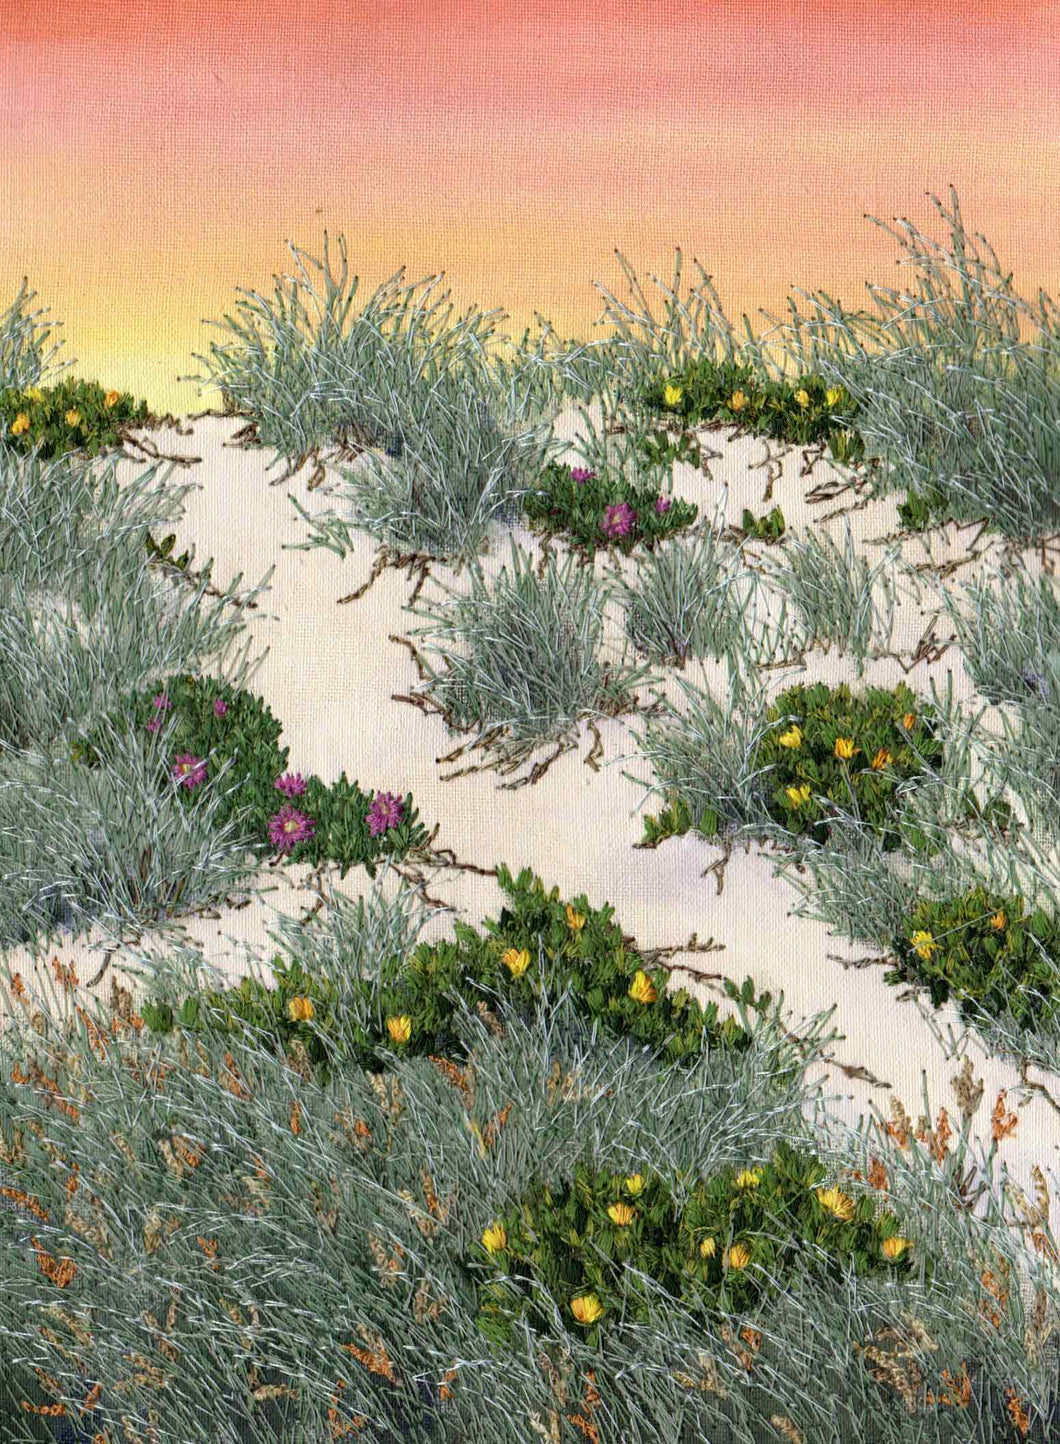 Flora on the High Dune